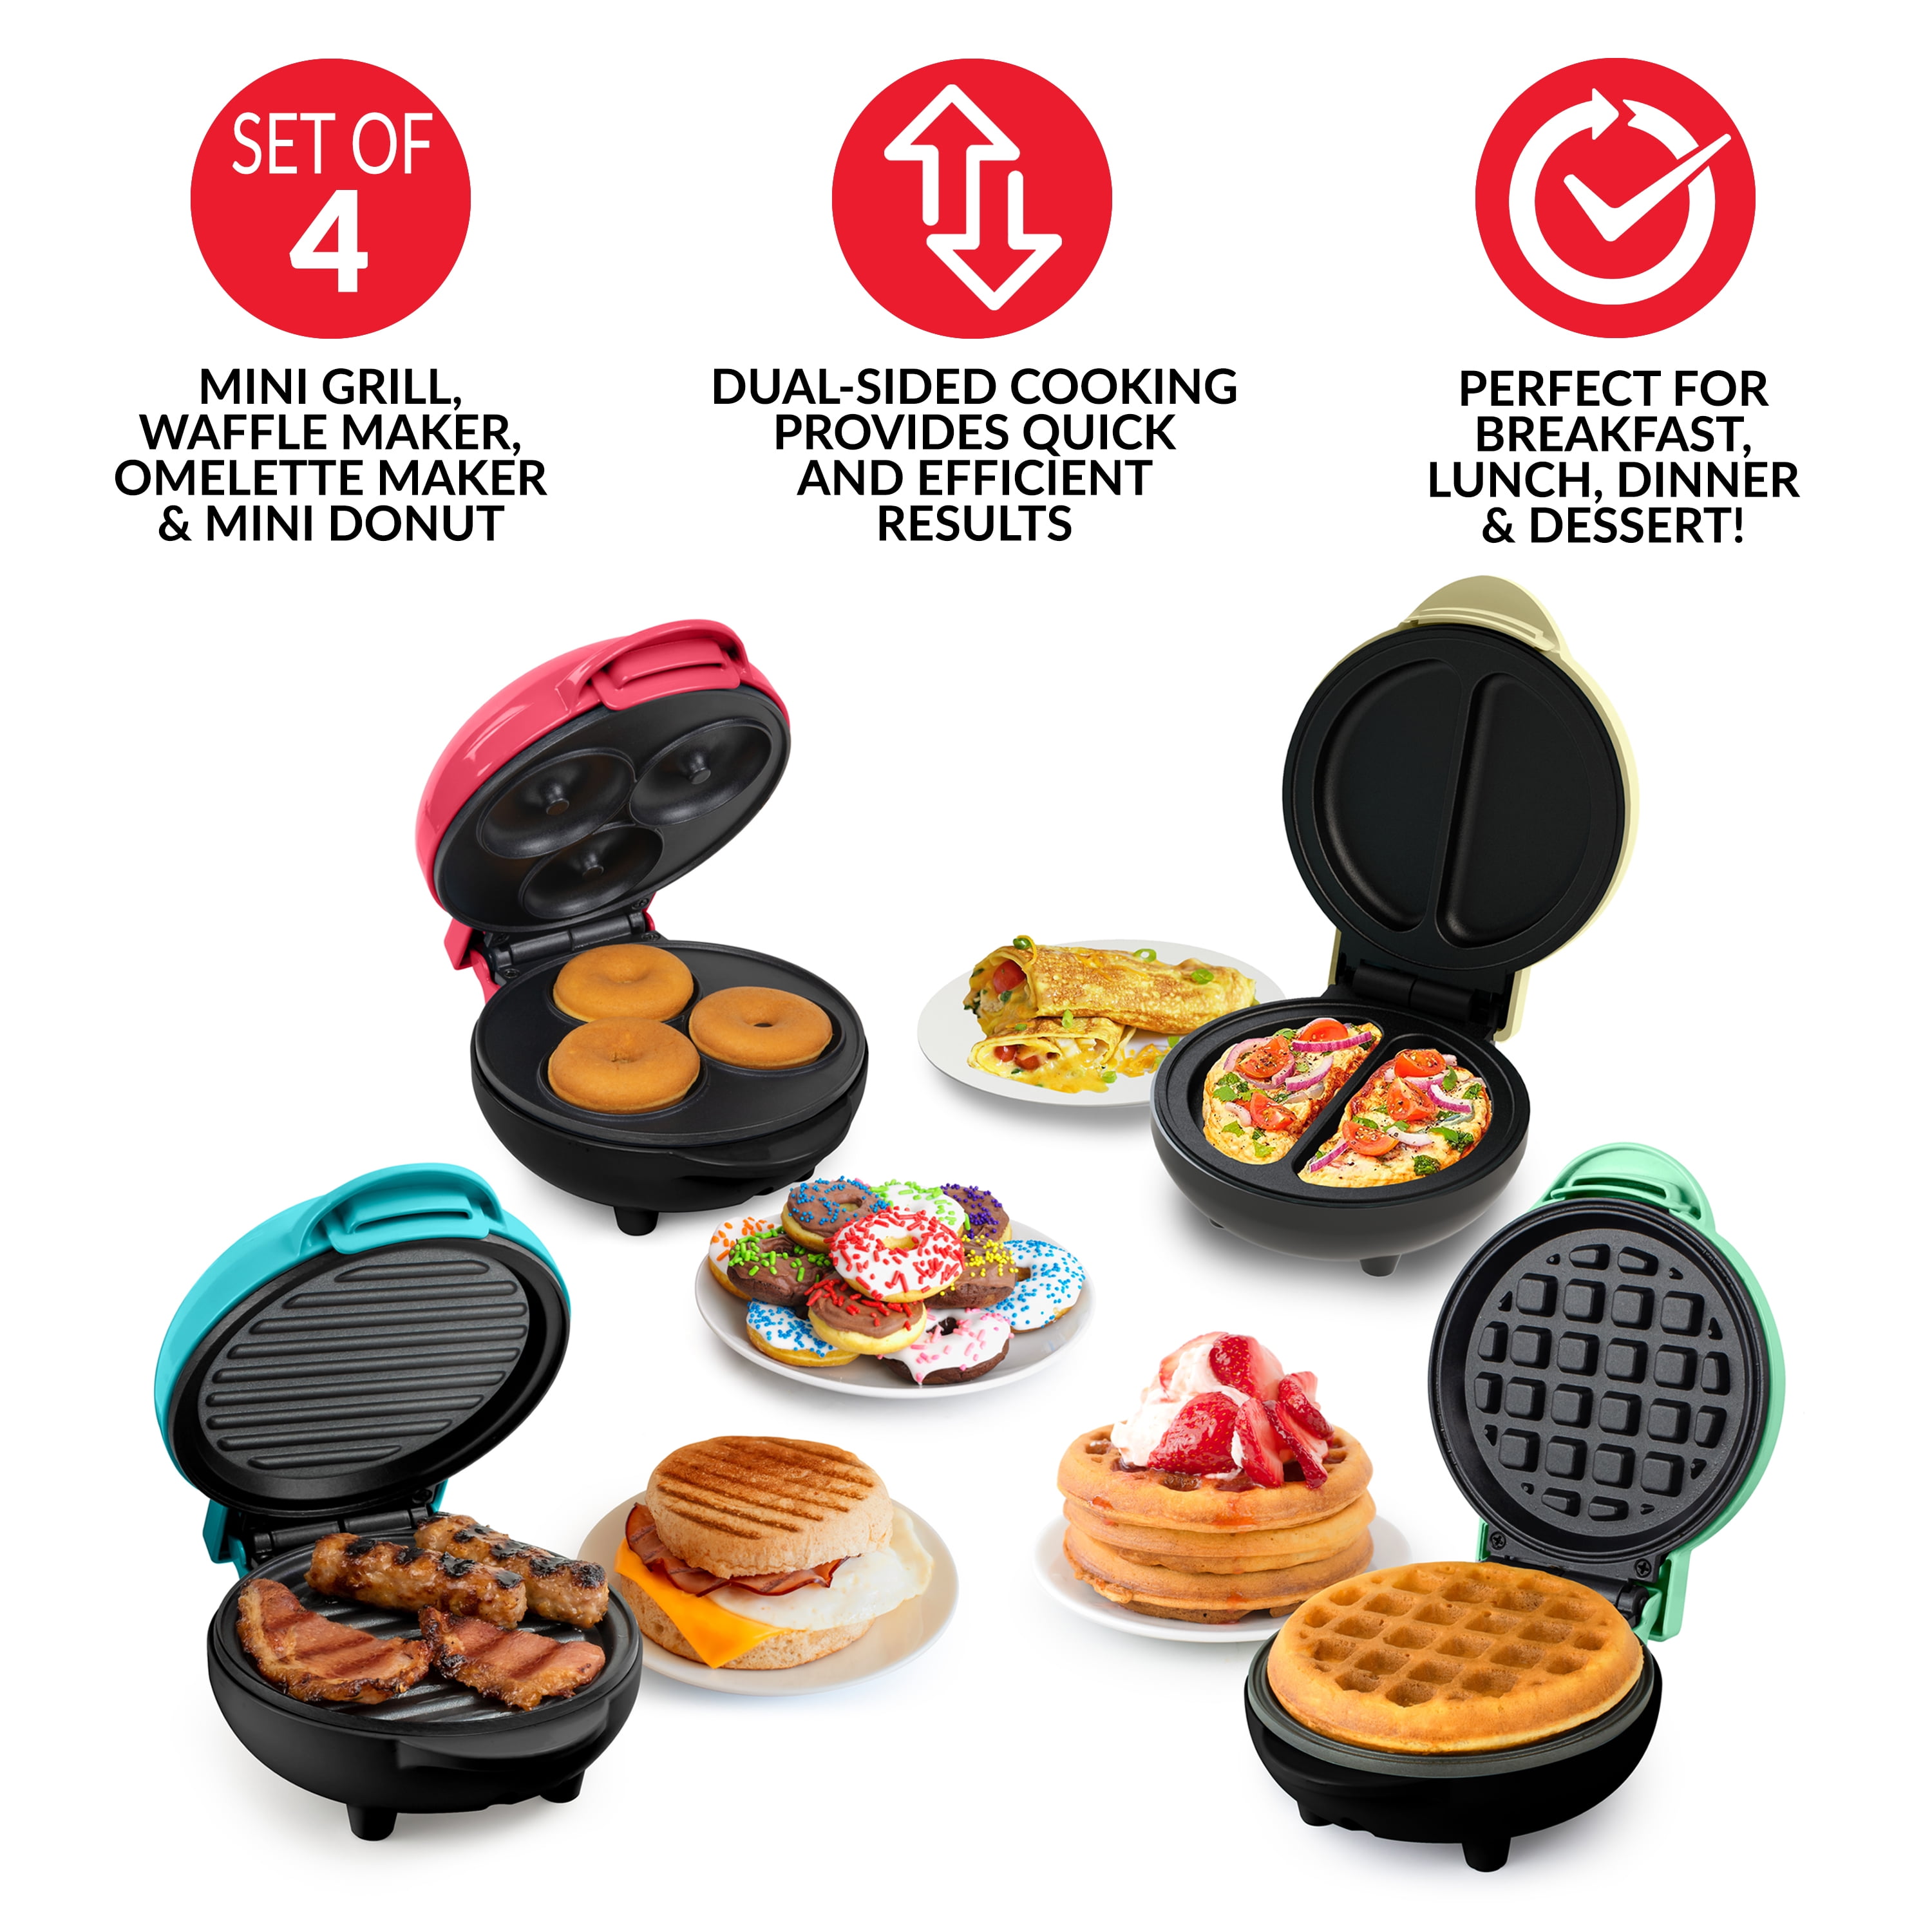 Bella Mini Waffle Maker, Christmas Tree and/or Bella Mini Donut Baker $8.99  (Retail $19.99) - My DFW Mommy